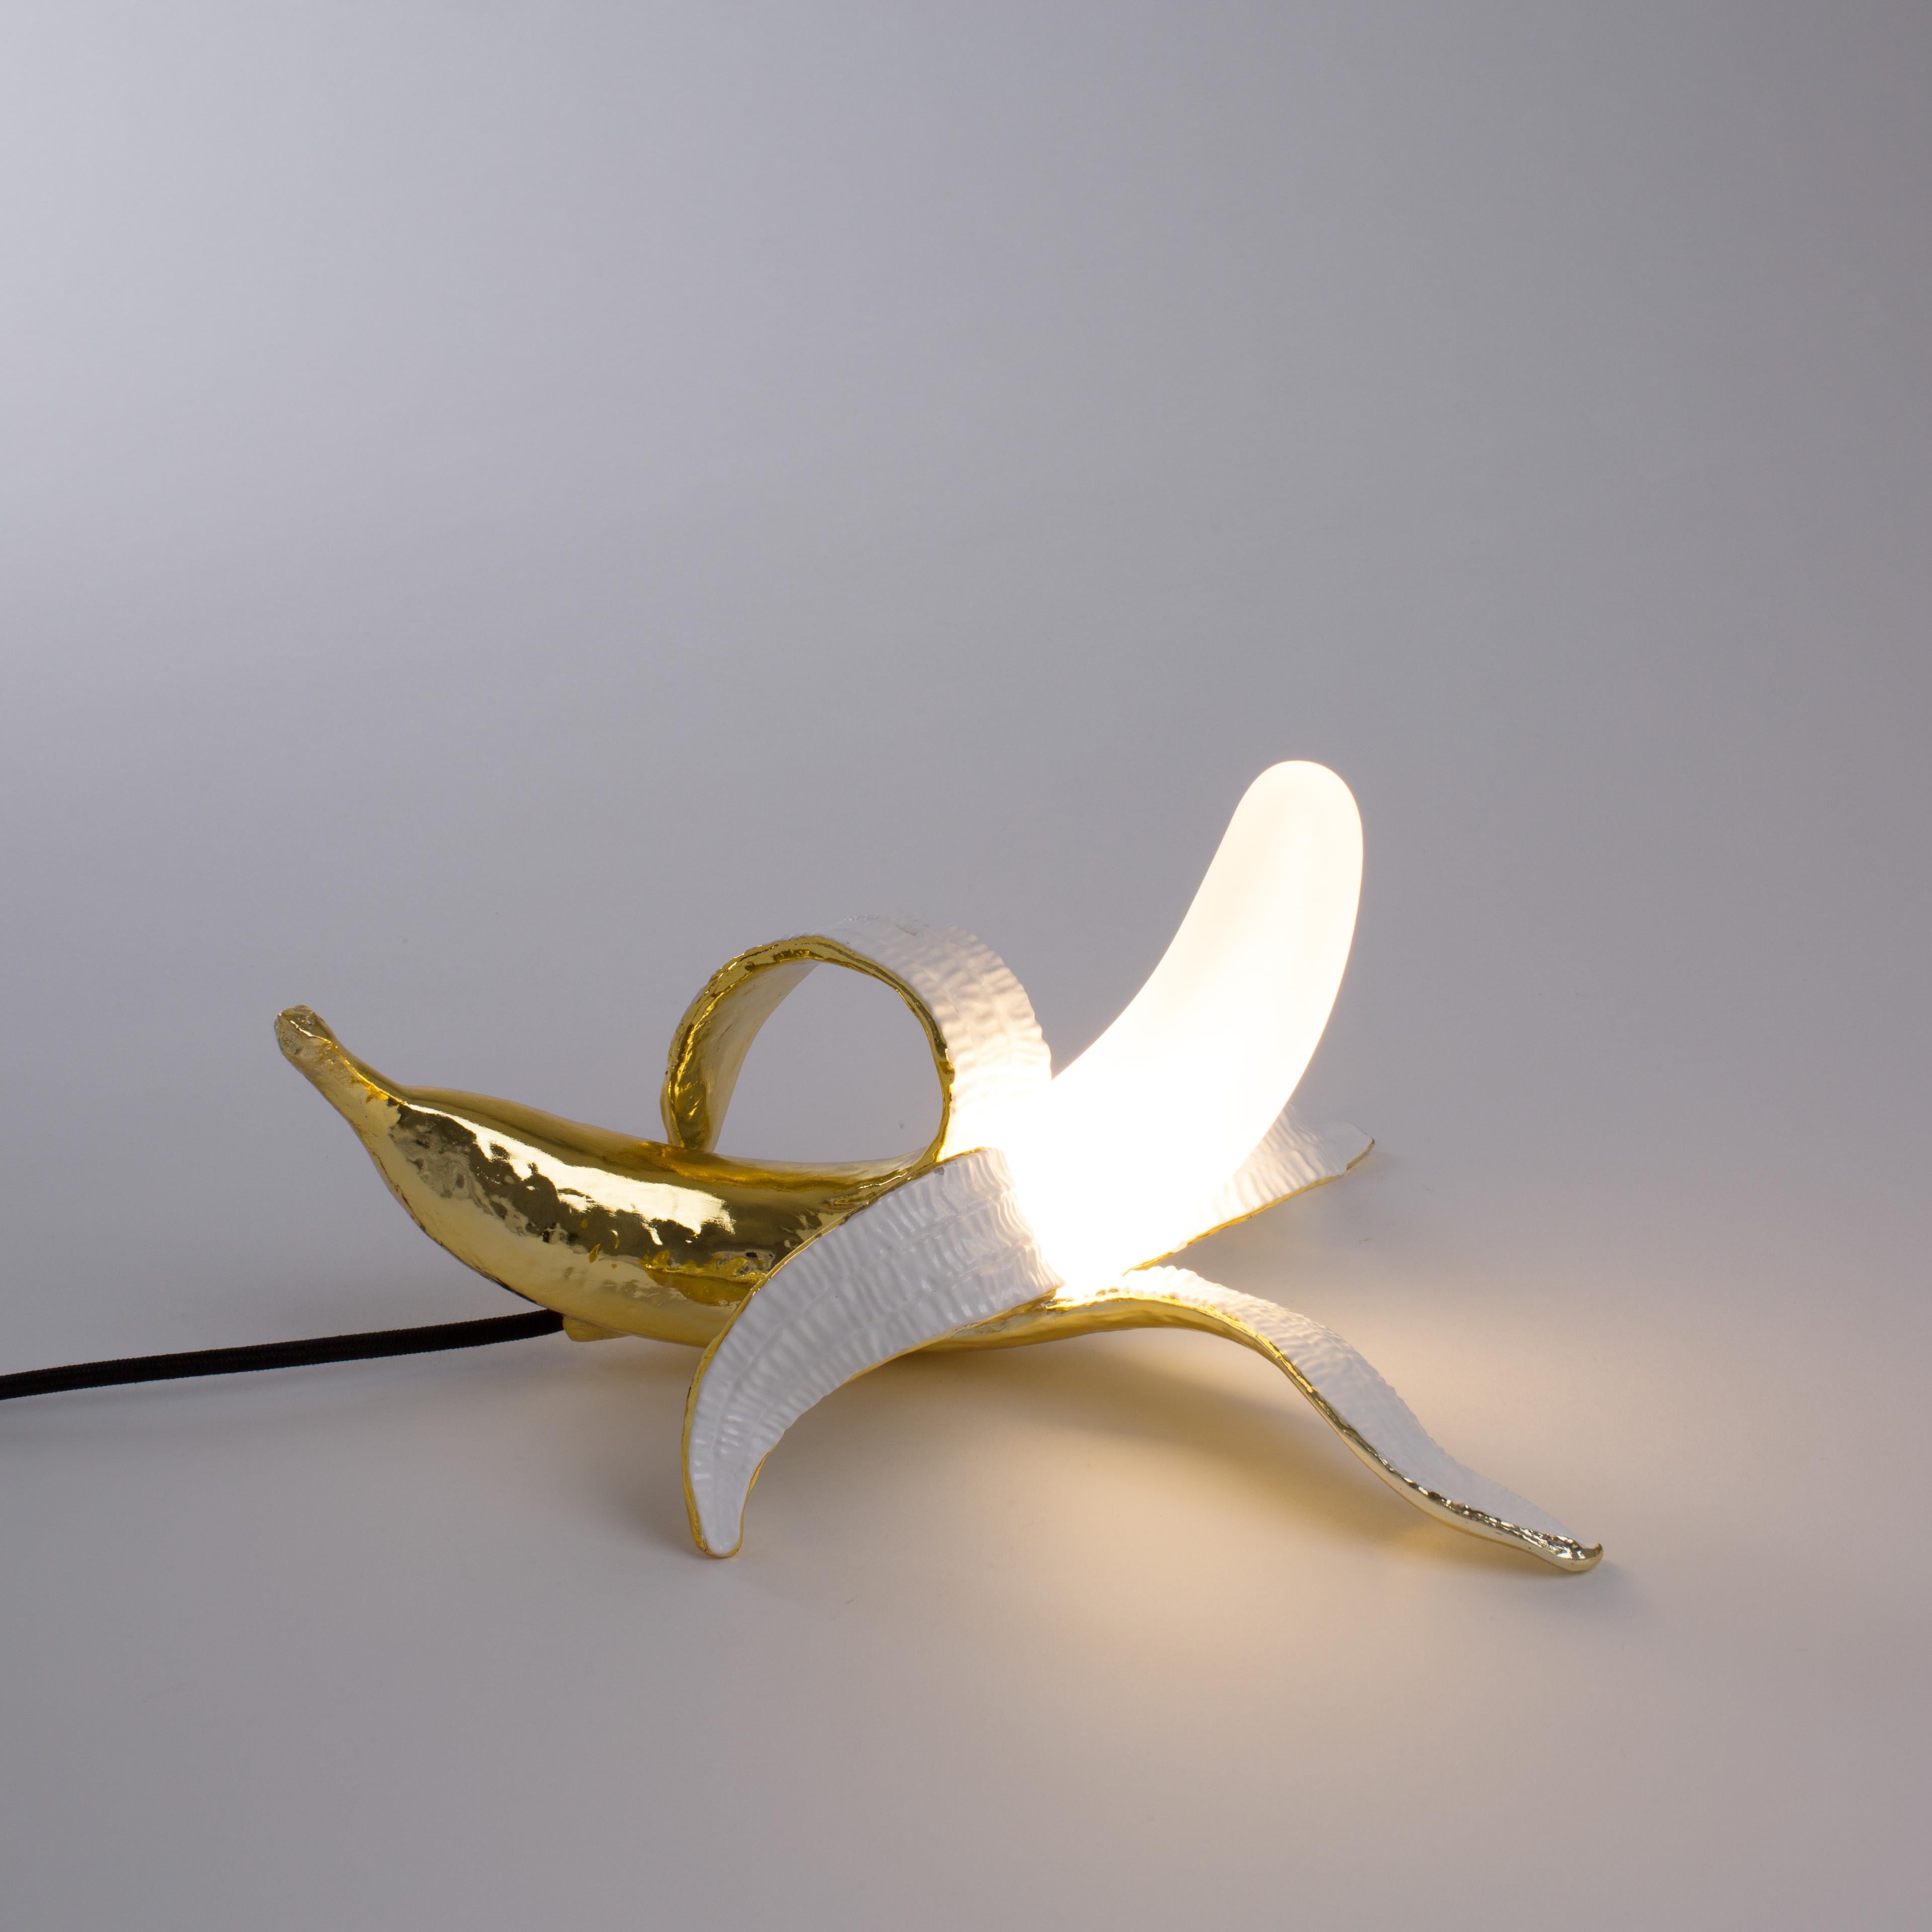 Banana Lamp by Studio Job in polished bronze, on display in Carpenters Workshop Gallery, is a symbol of outlandish creativity. Seletti and Un_Limited edition has proposed it in four glass and resin versions: Huey, Dewey, Louie & Phooey.

-